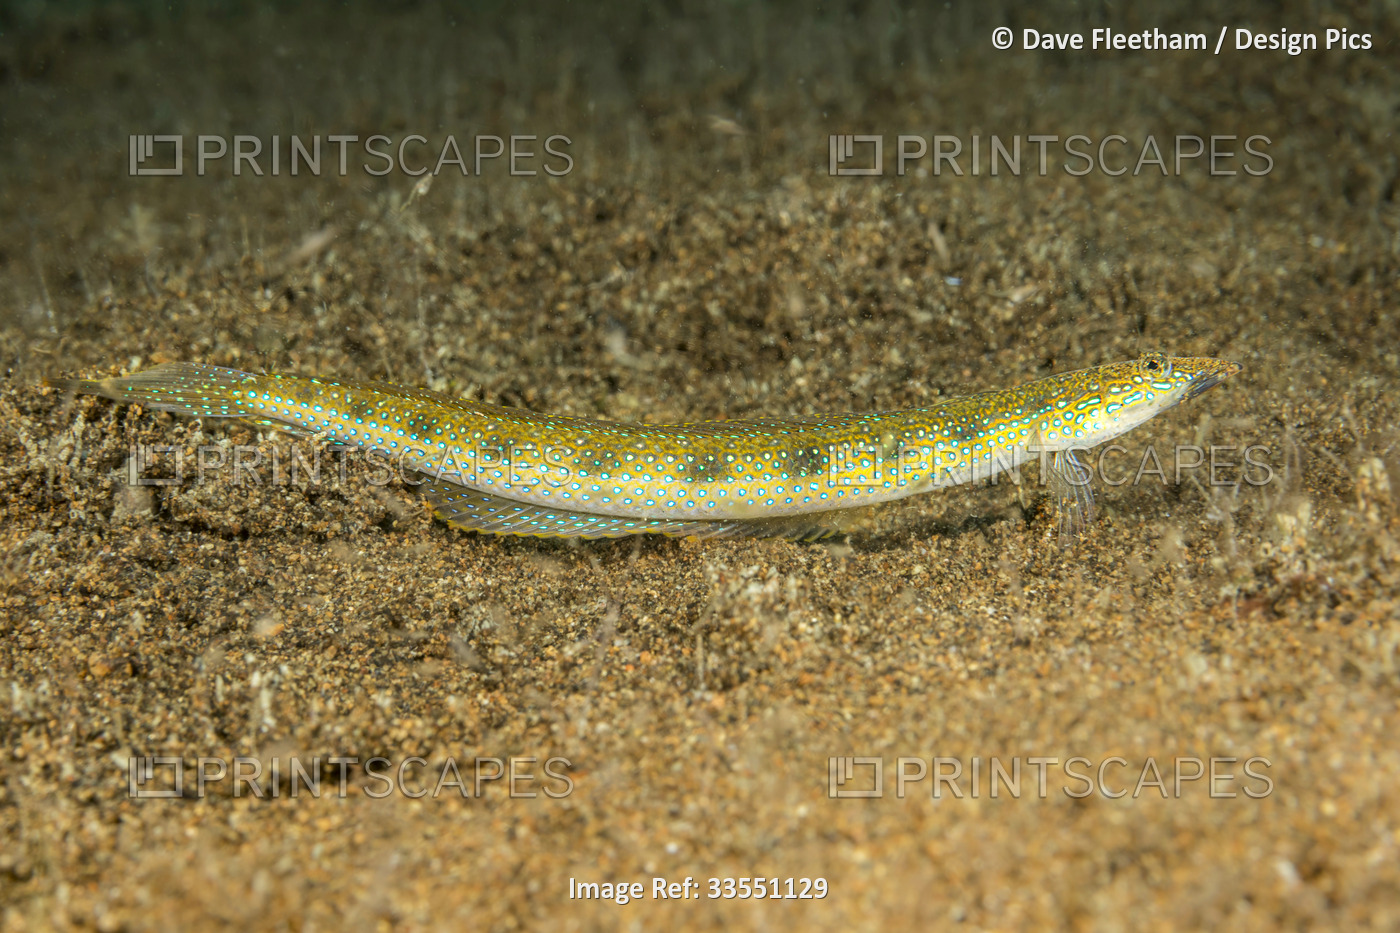 The Spotted sand-diver (Trichonotus setiger) will disappear into the sand ...